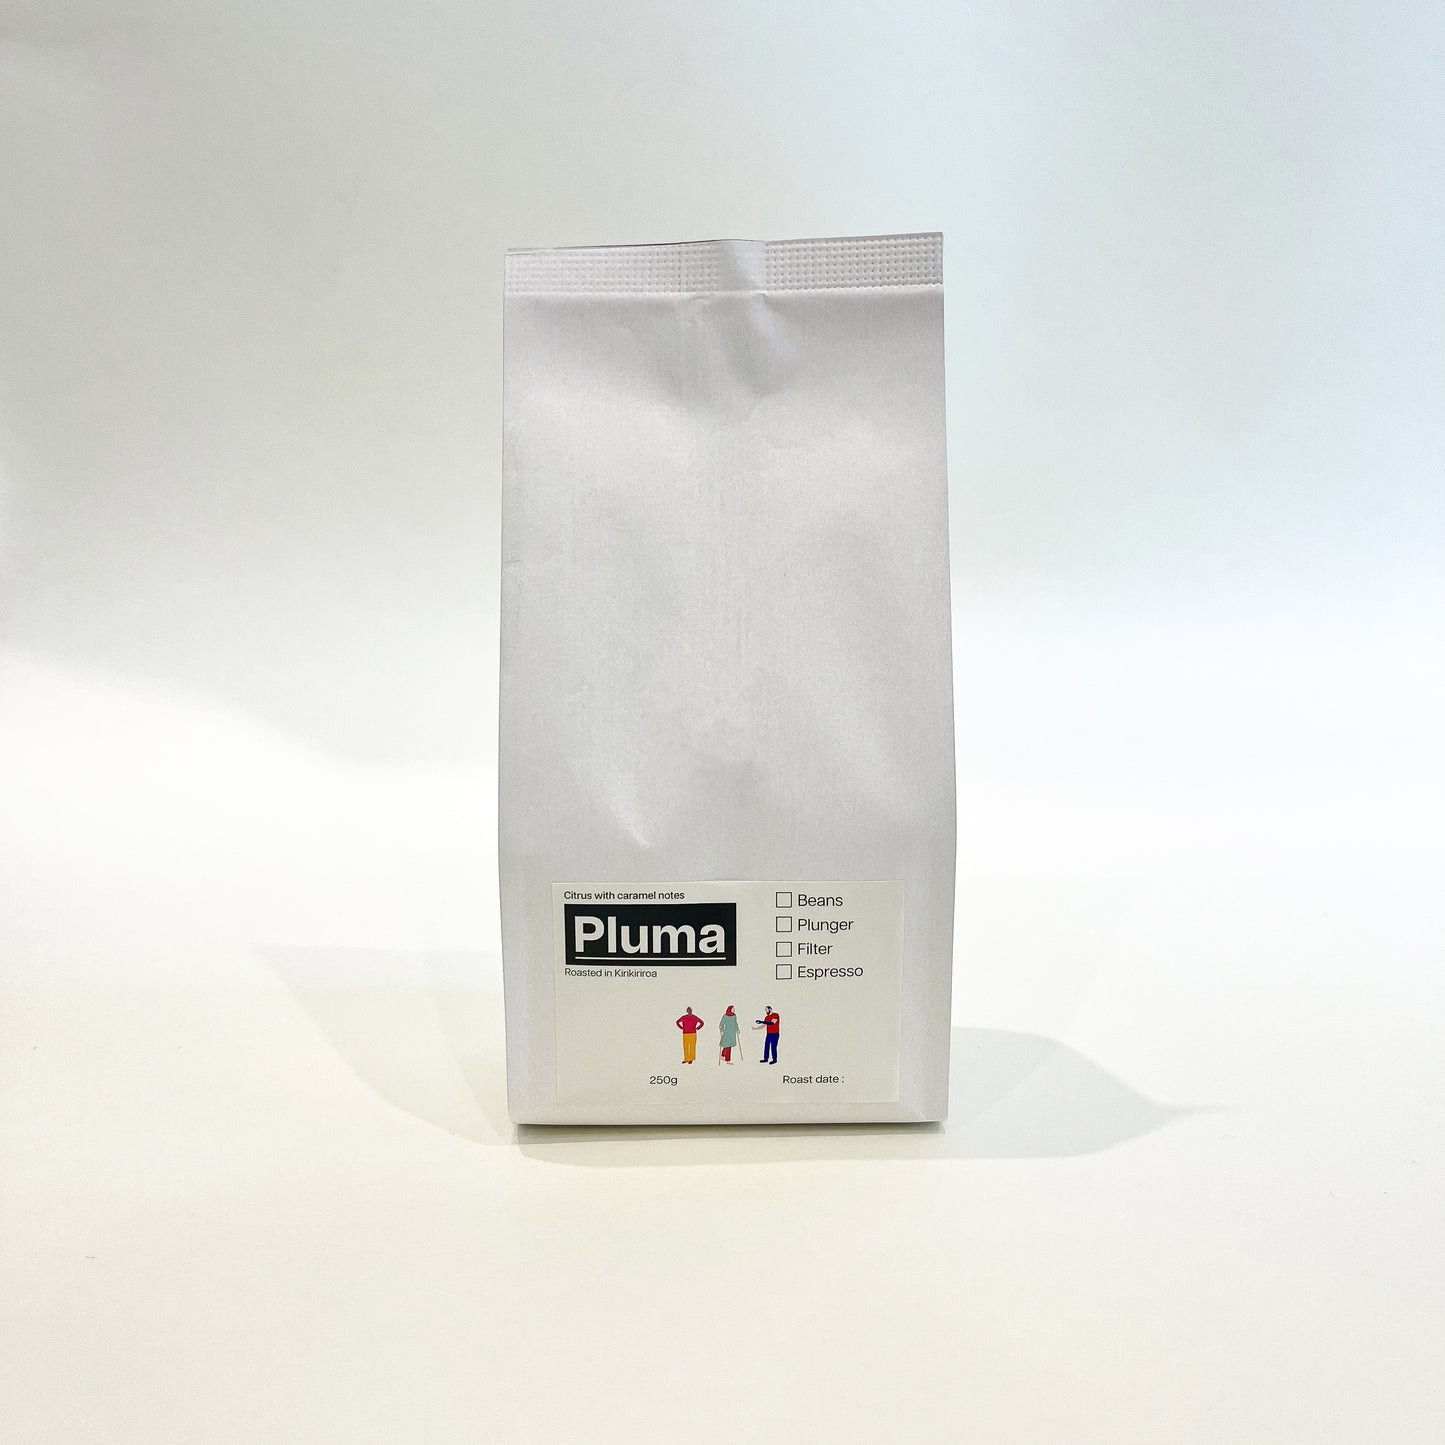 A white bag of TLF Pluma coffee with a green label.